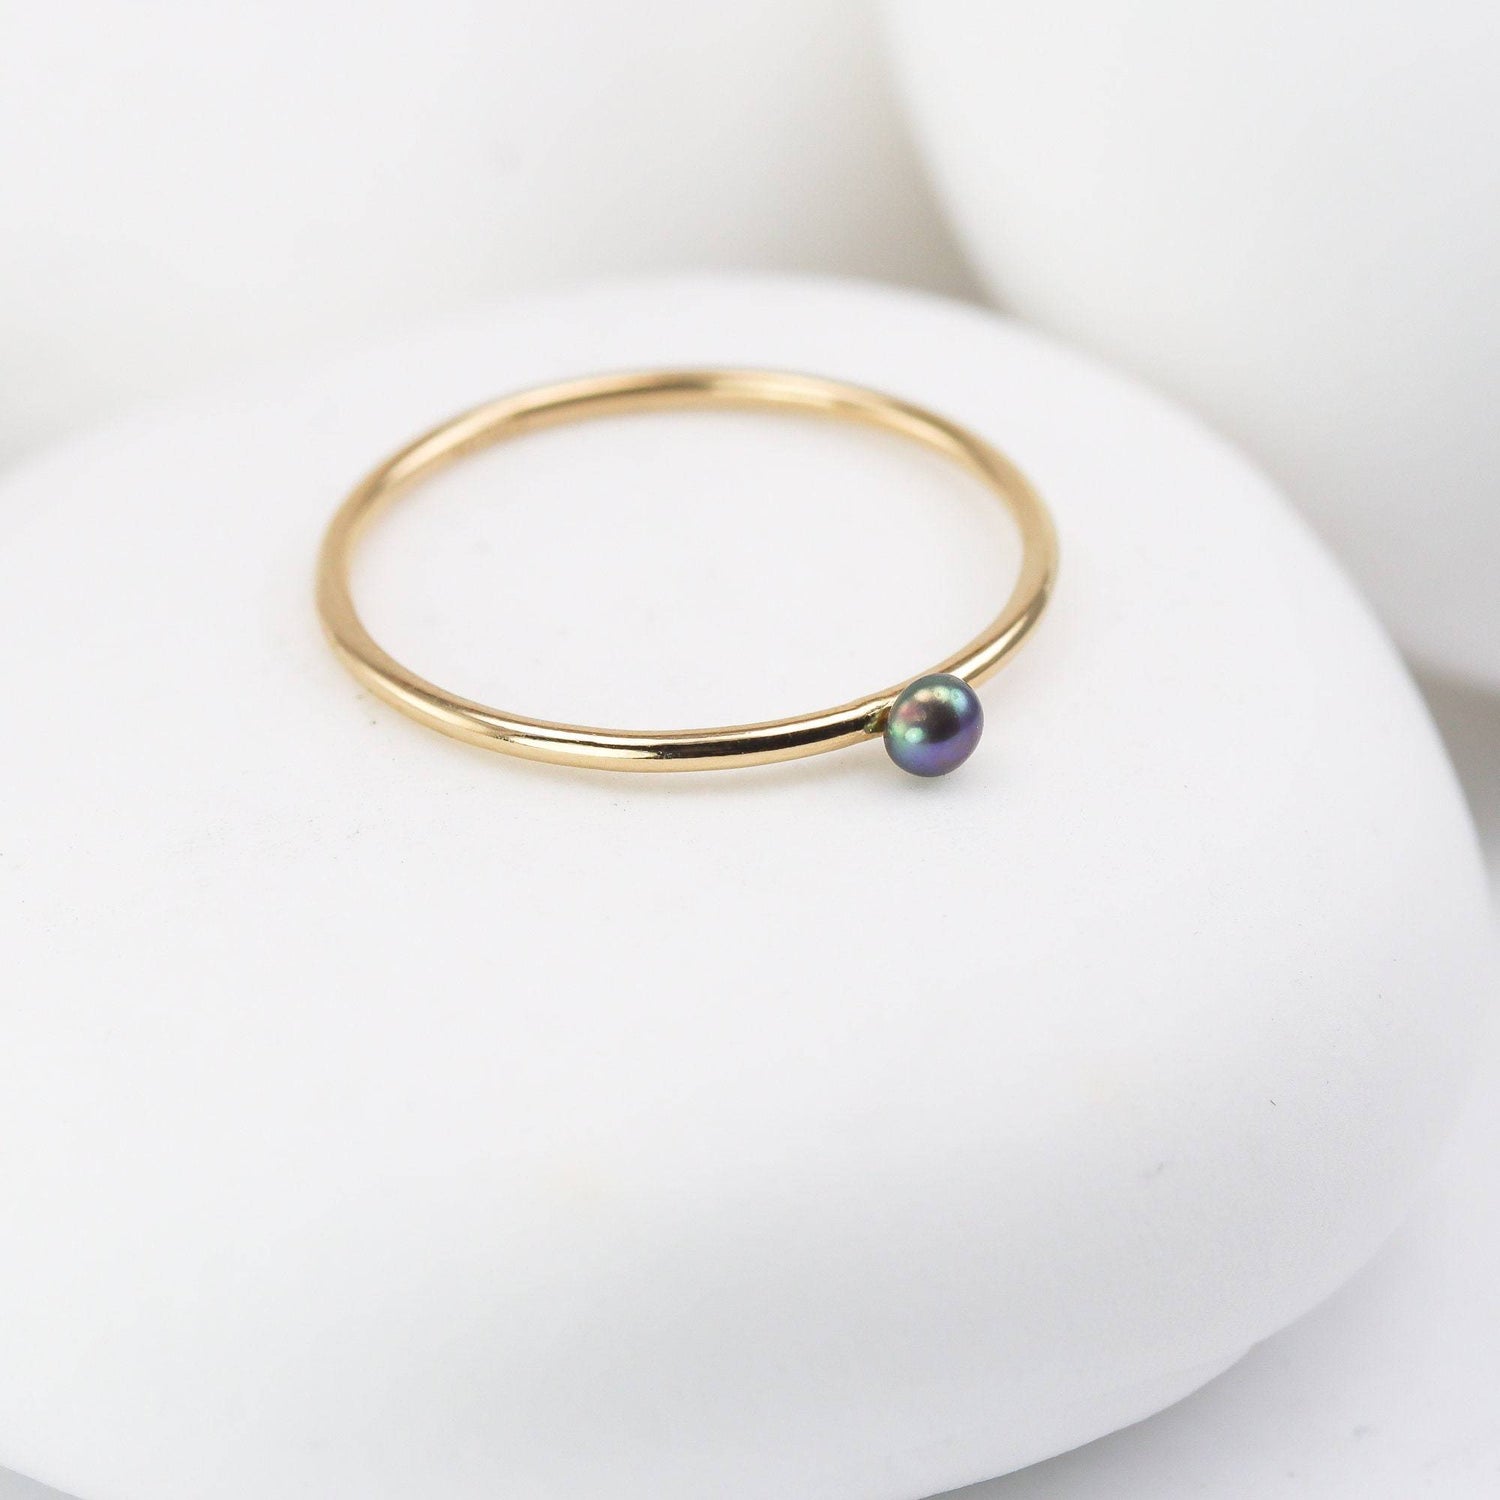 Black Mini Pearl Stacking Ring in Gold Fill